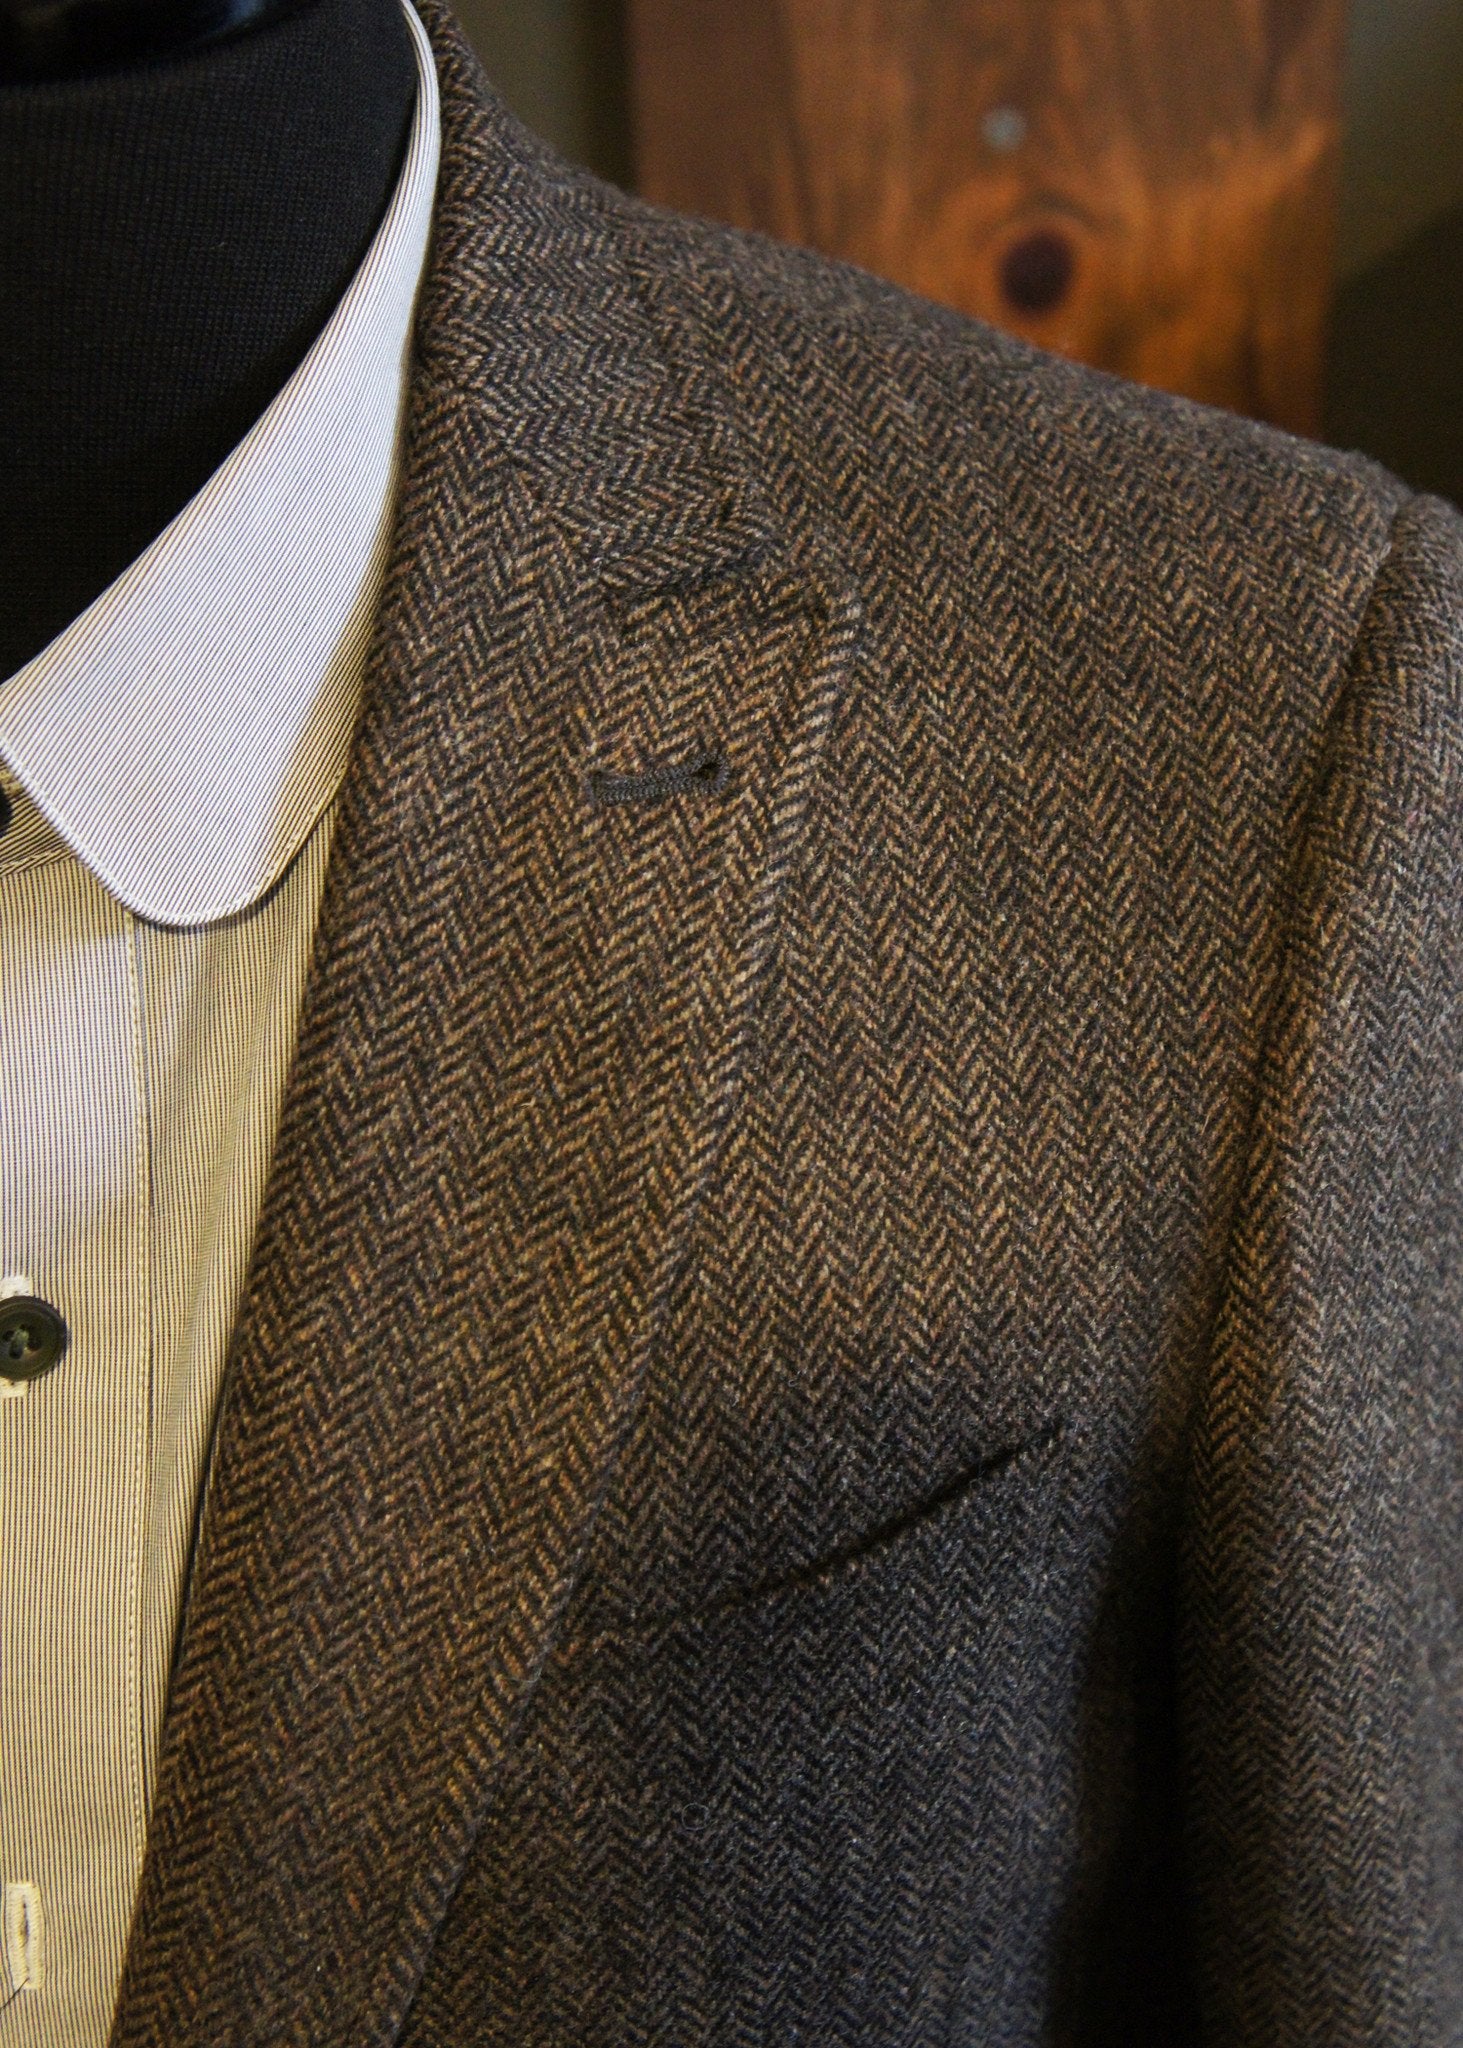 Crossley Suit-Bykowski Tailor & Garb slim fit Wool tailored fit Rustic semi peak lapel prohibition peaky blinders Made in USA heritage clothing Handcrafted Gatsby English Tweed Edwardian Dapper Classic Art Deco 1930's 1920's 1910's